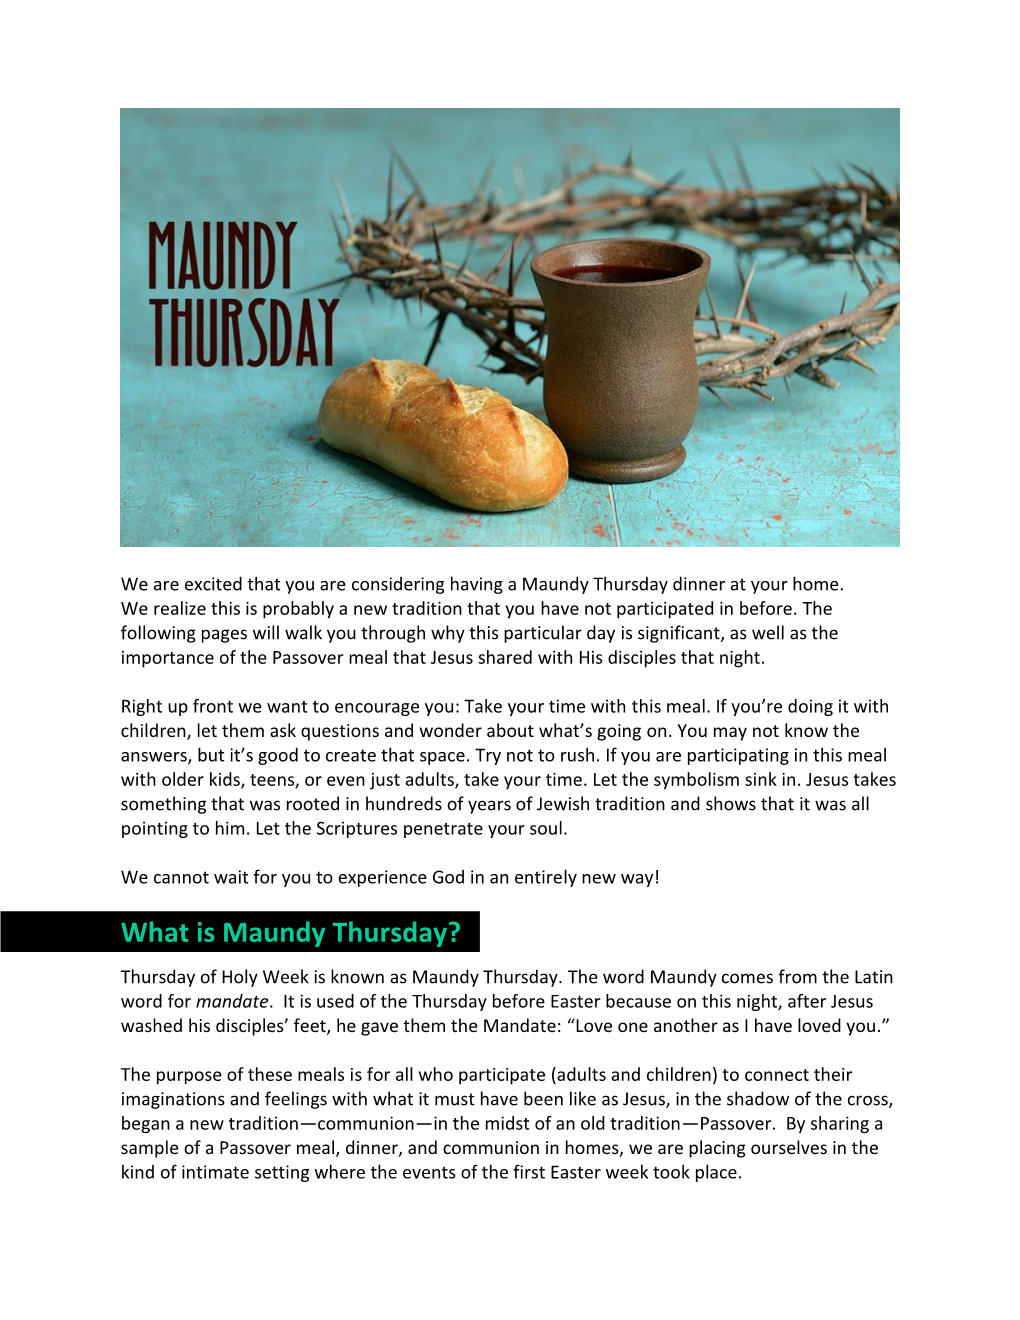 What Is Maundy Thursday?